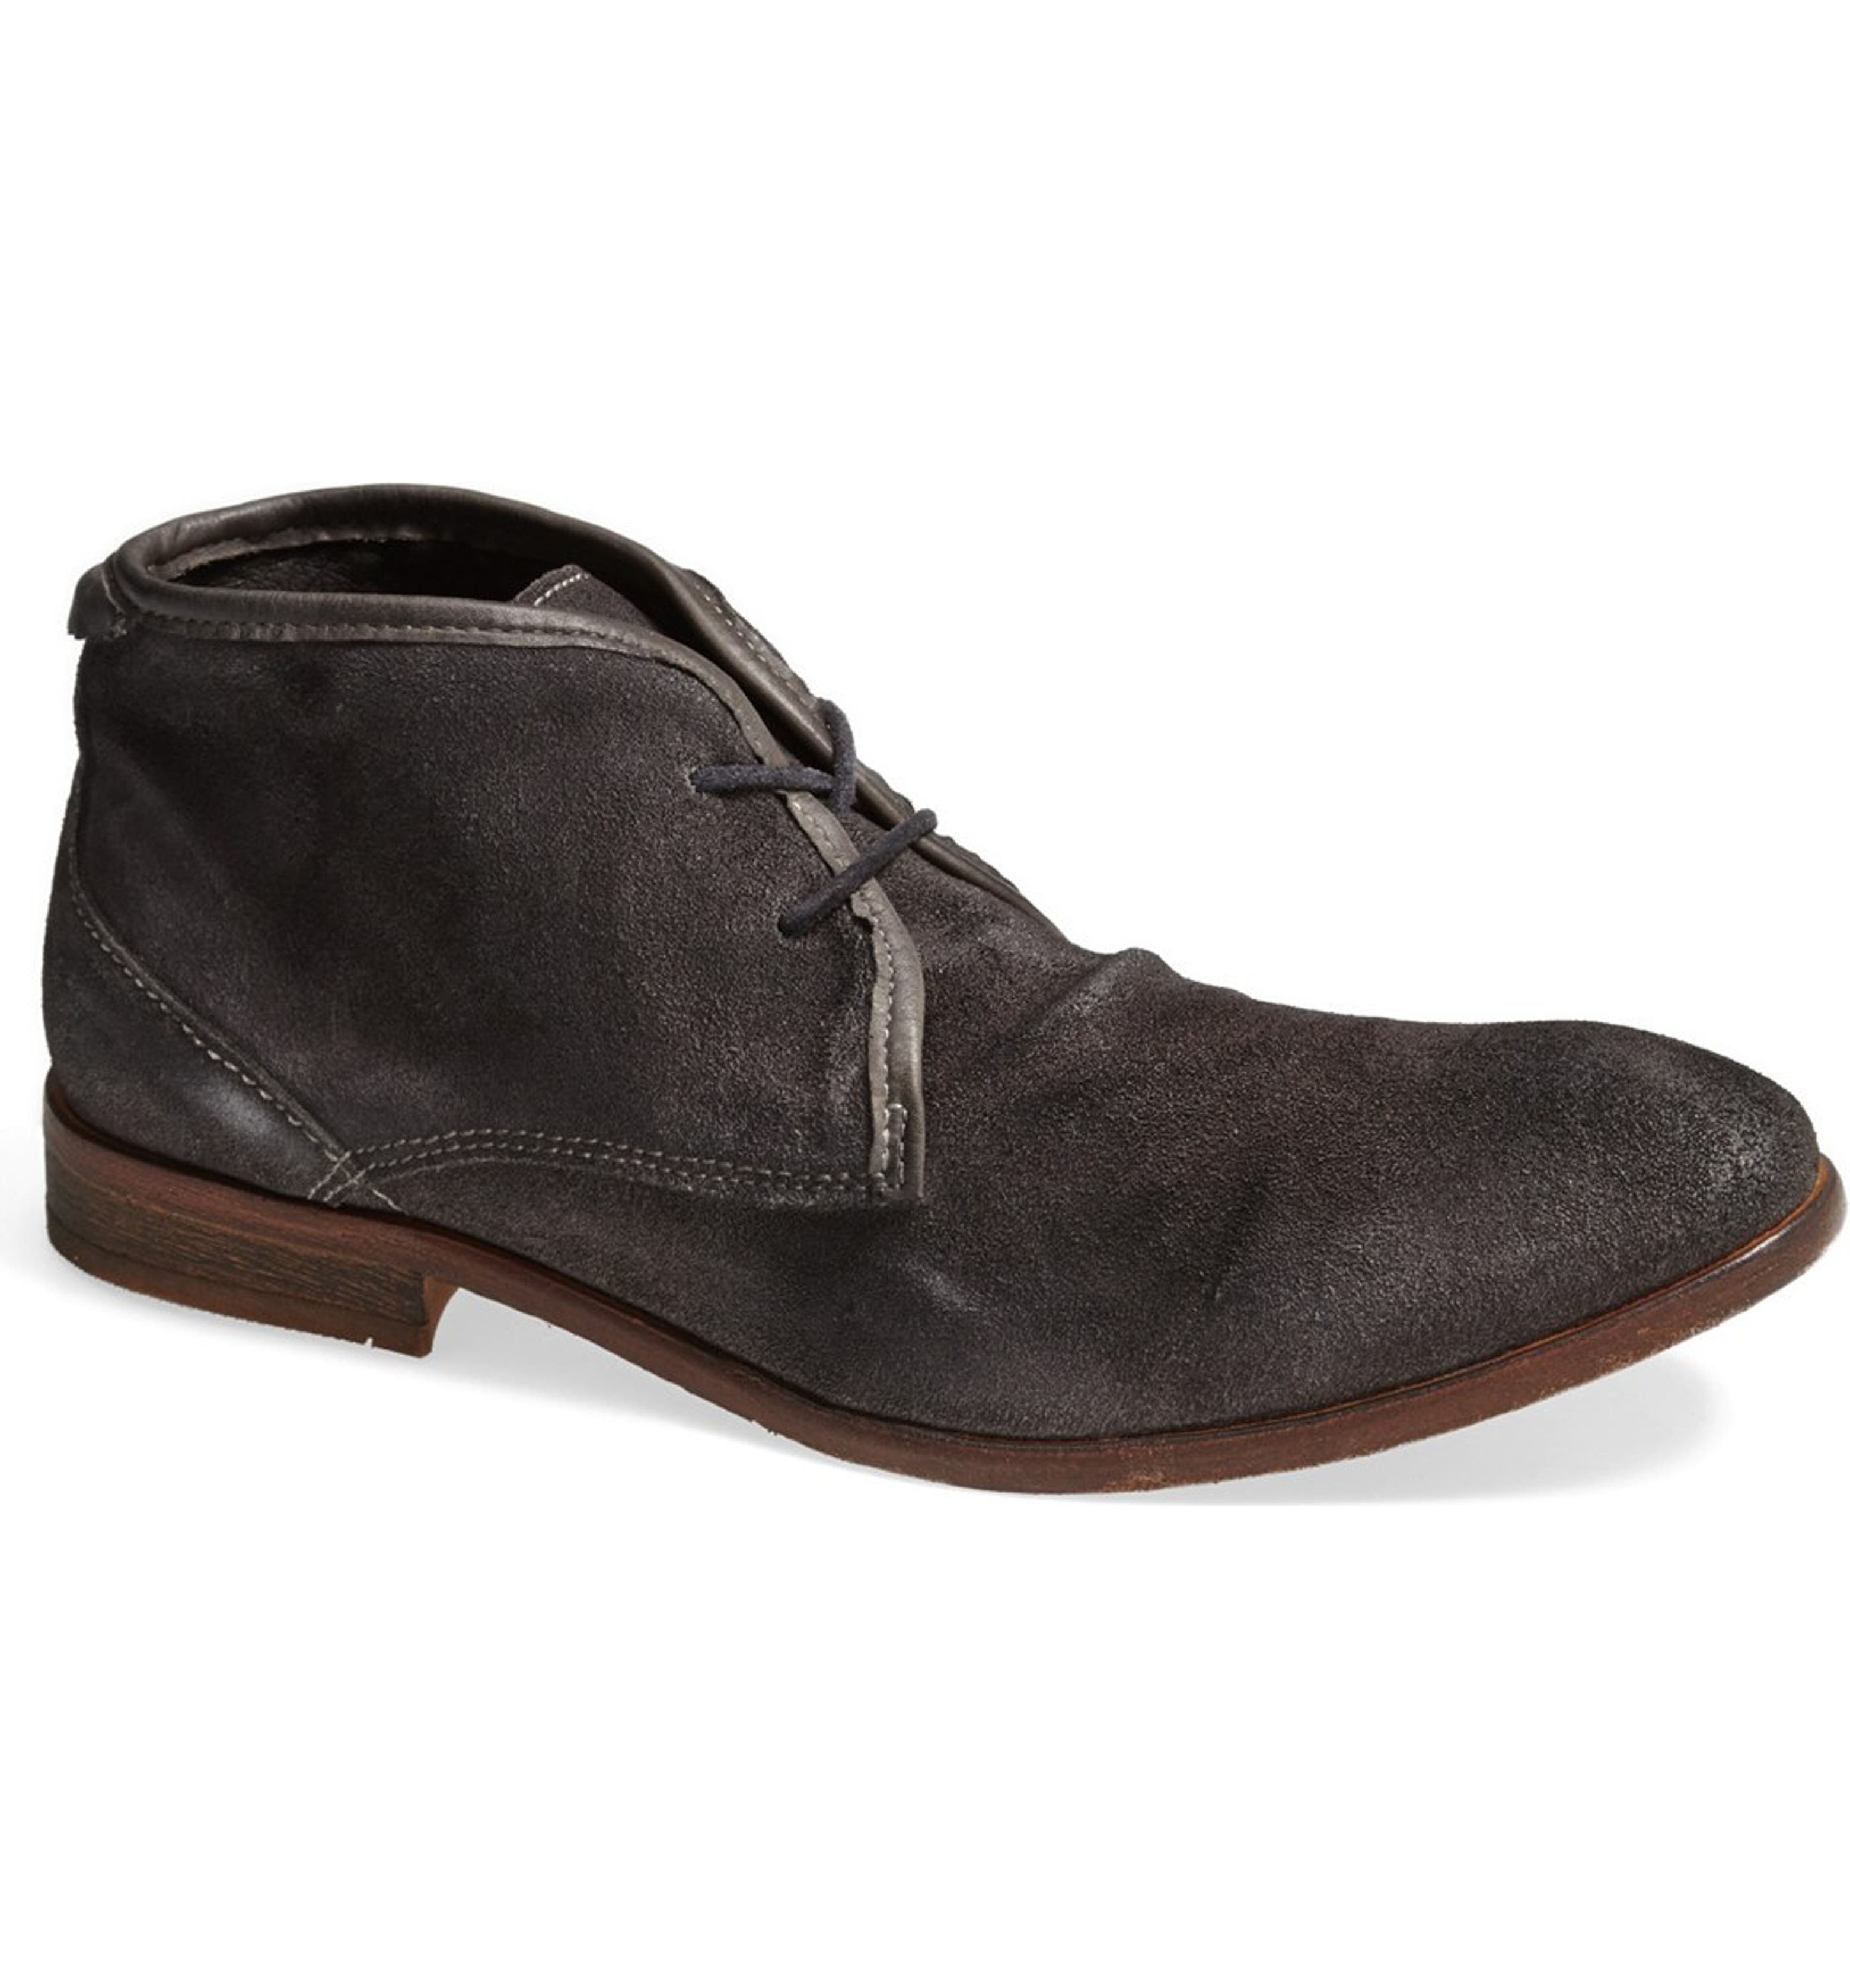 H by Hudson 'Cruise' Chukka Boot | Nordstrom